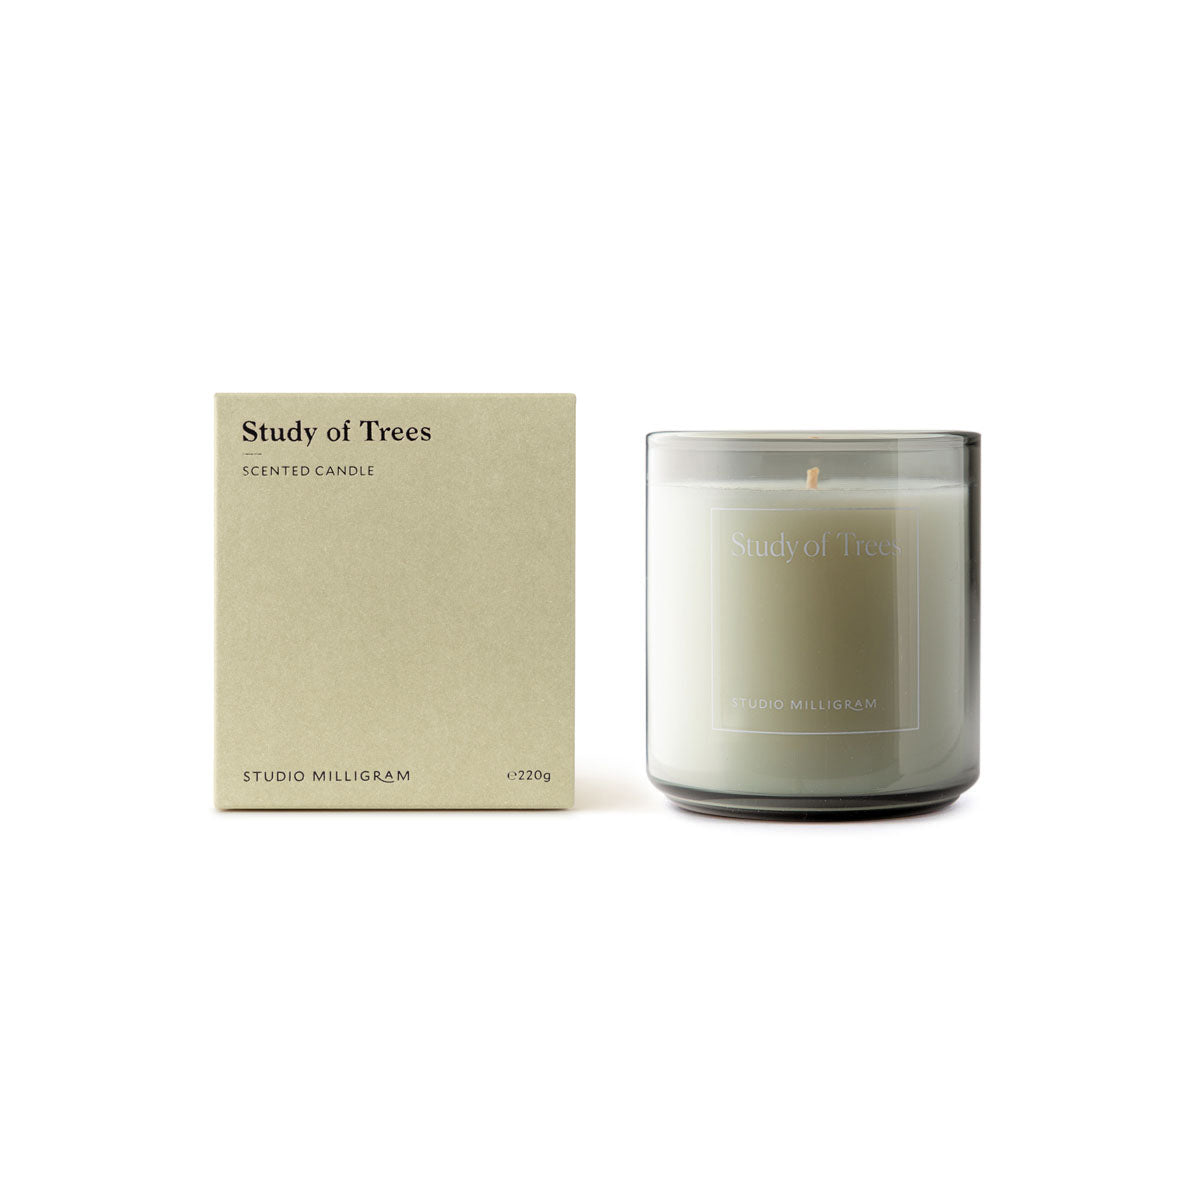 Scented Candle / Study of Trees